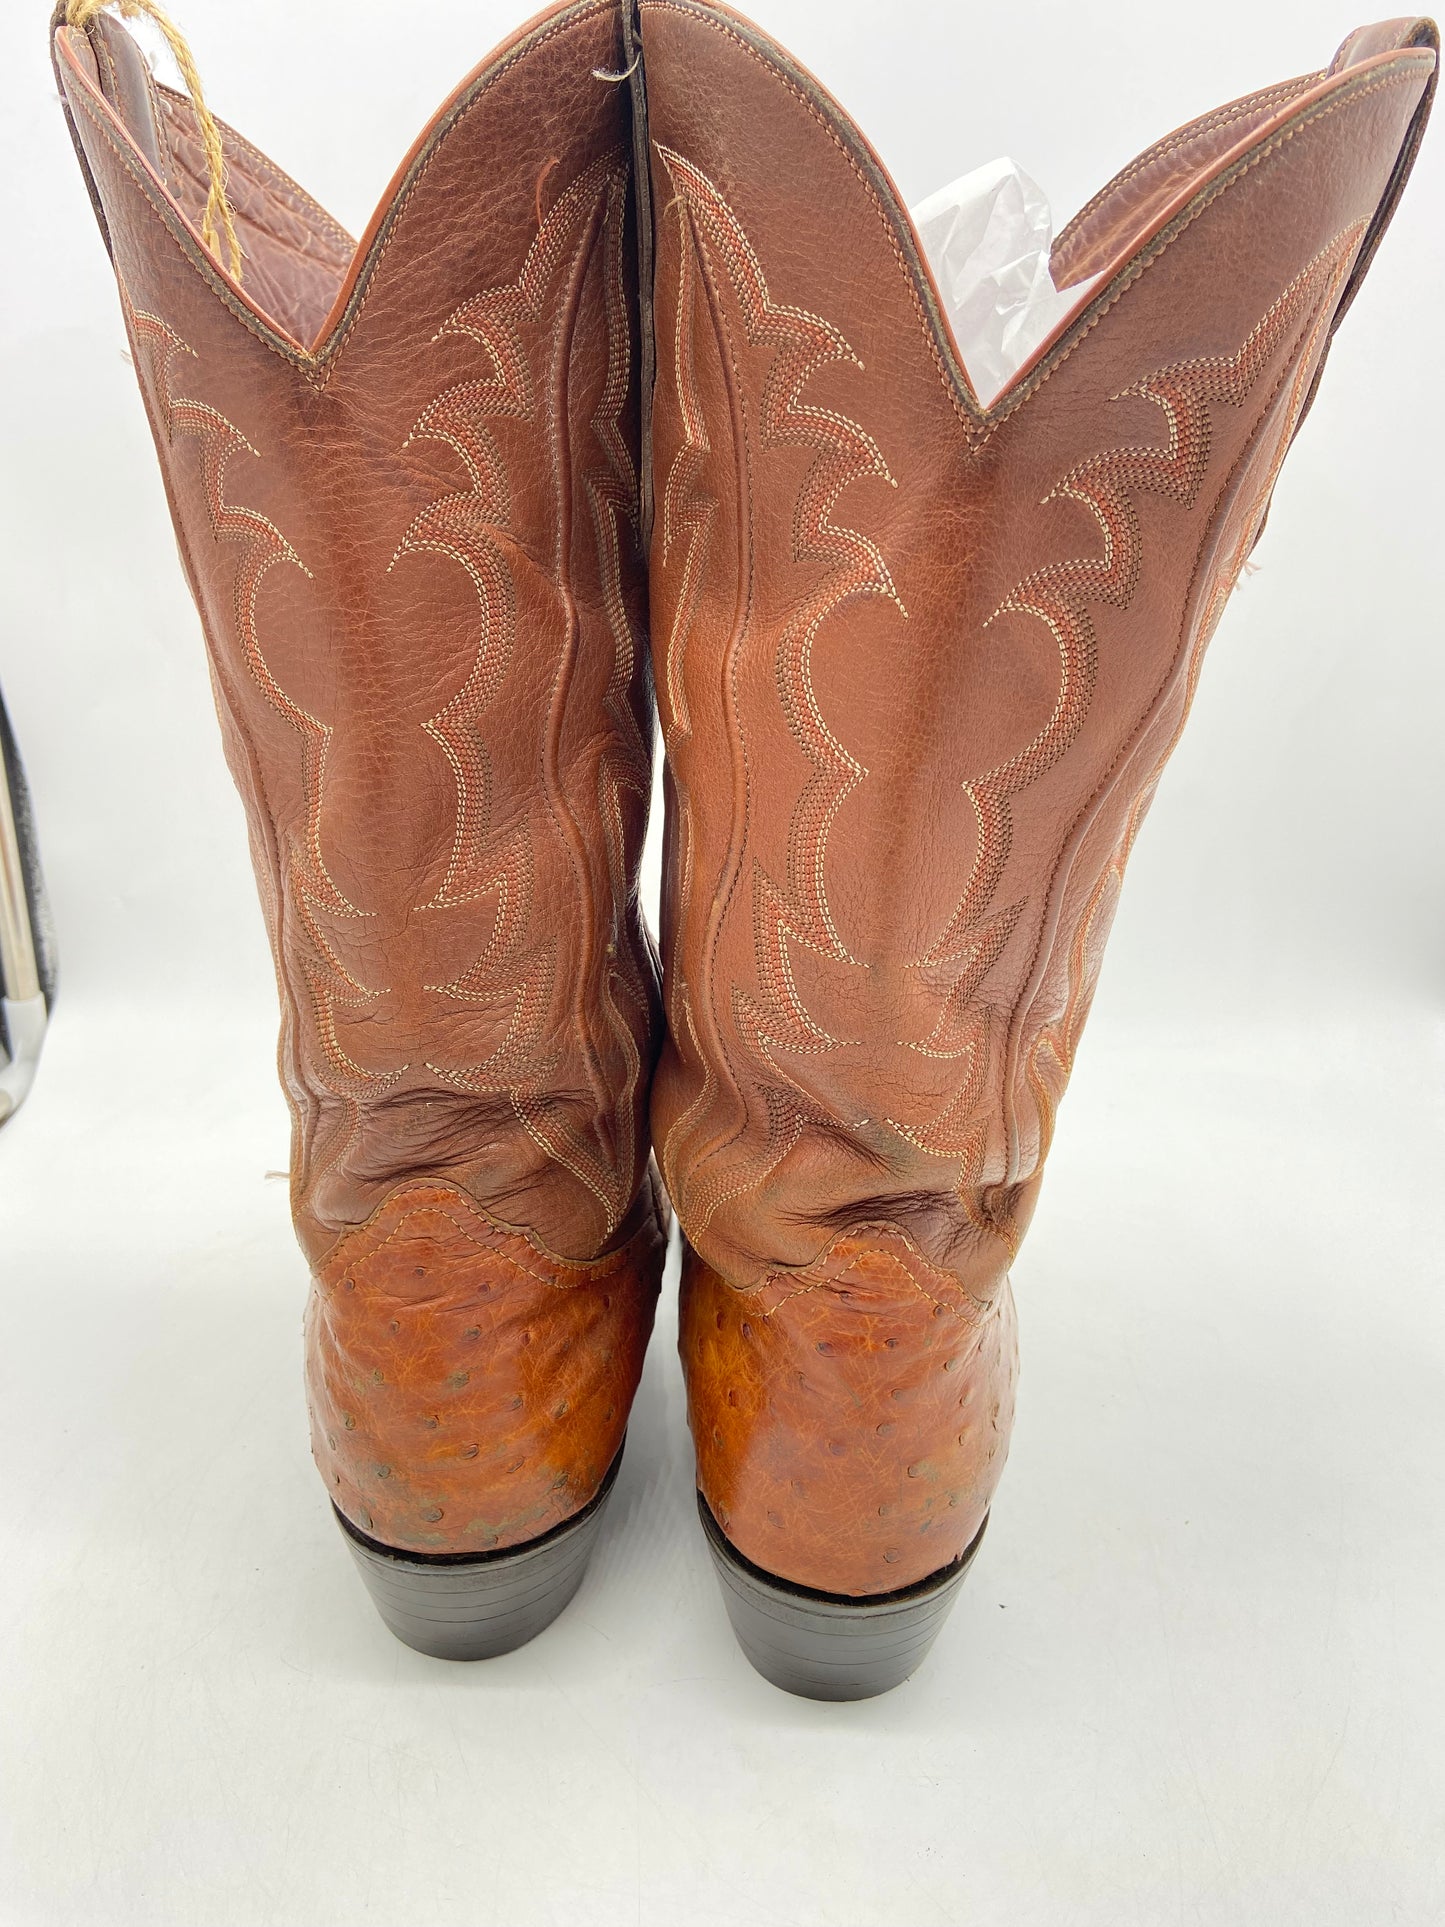 Nocona Brown Full Ostrich Quill Cowboy Western Boots Sz 10D